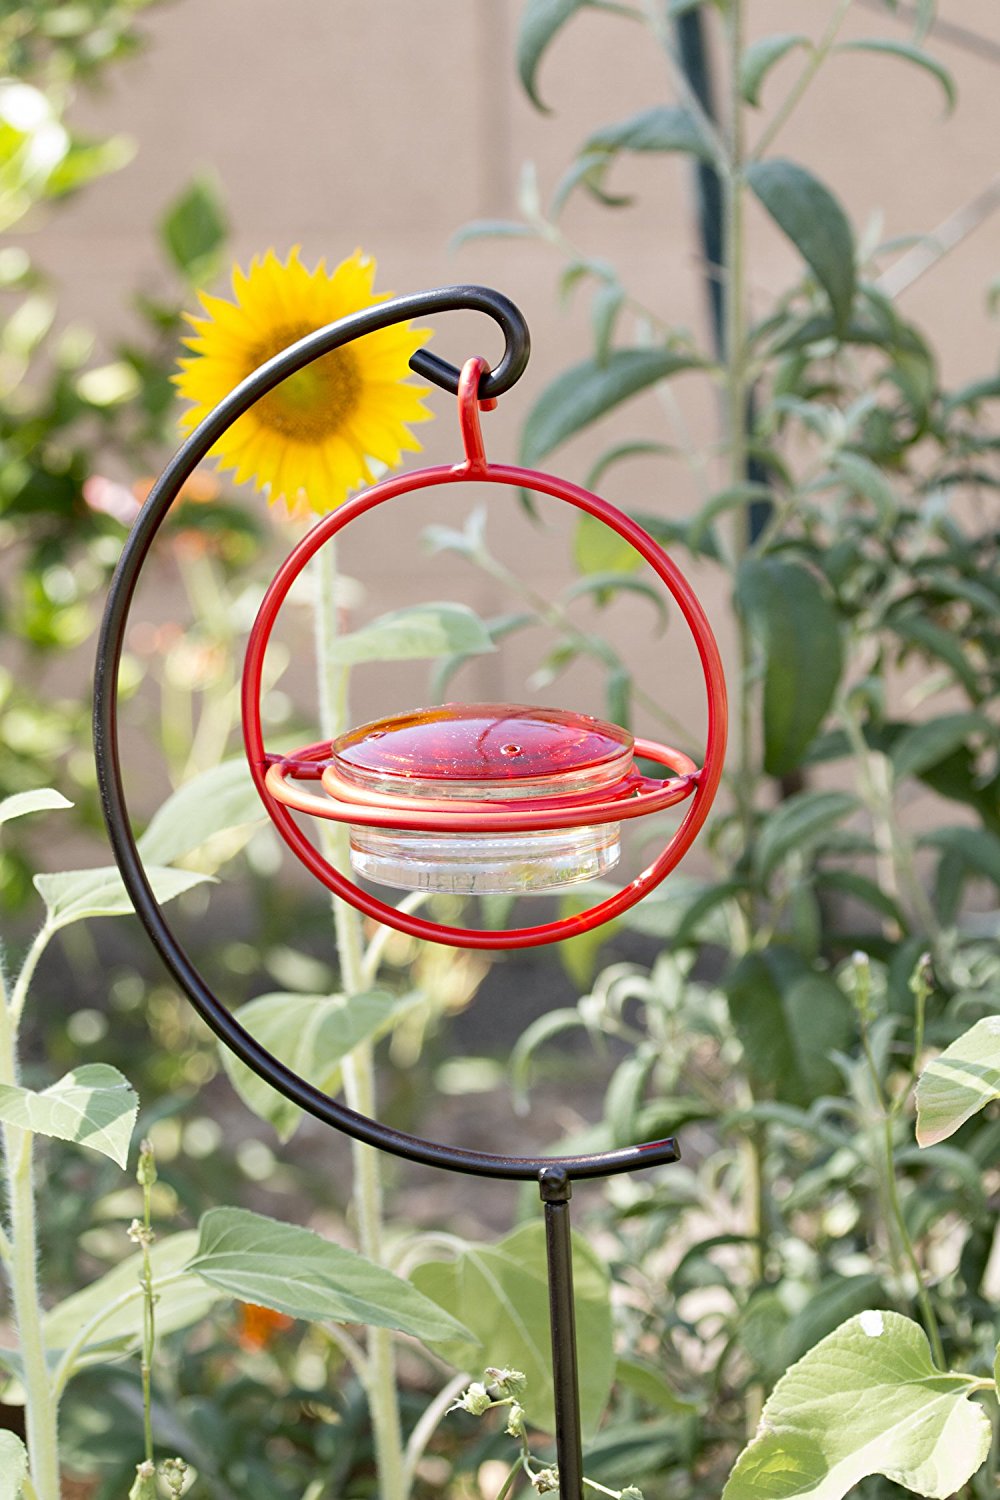 Best Small Glass Hummingbird Feeder with Red Perch